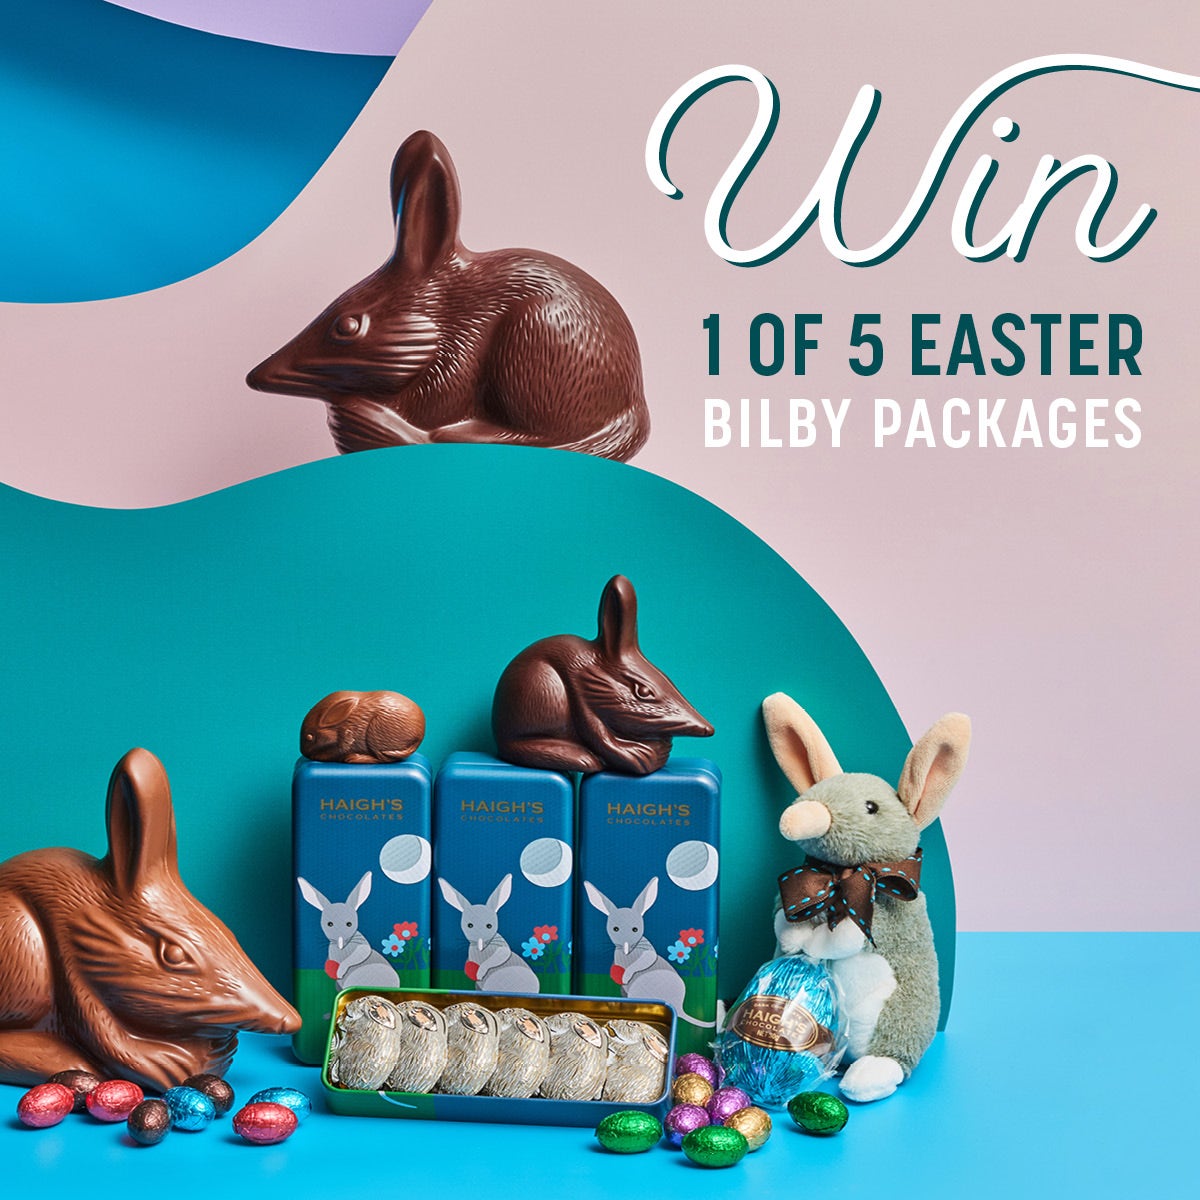 Win an Easter Bilby prize